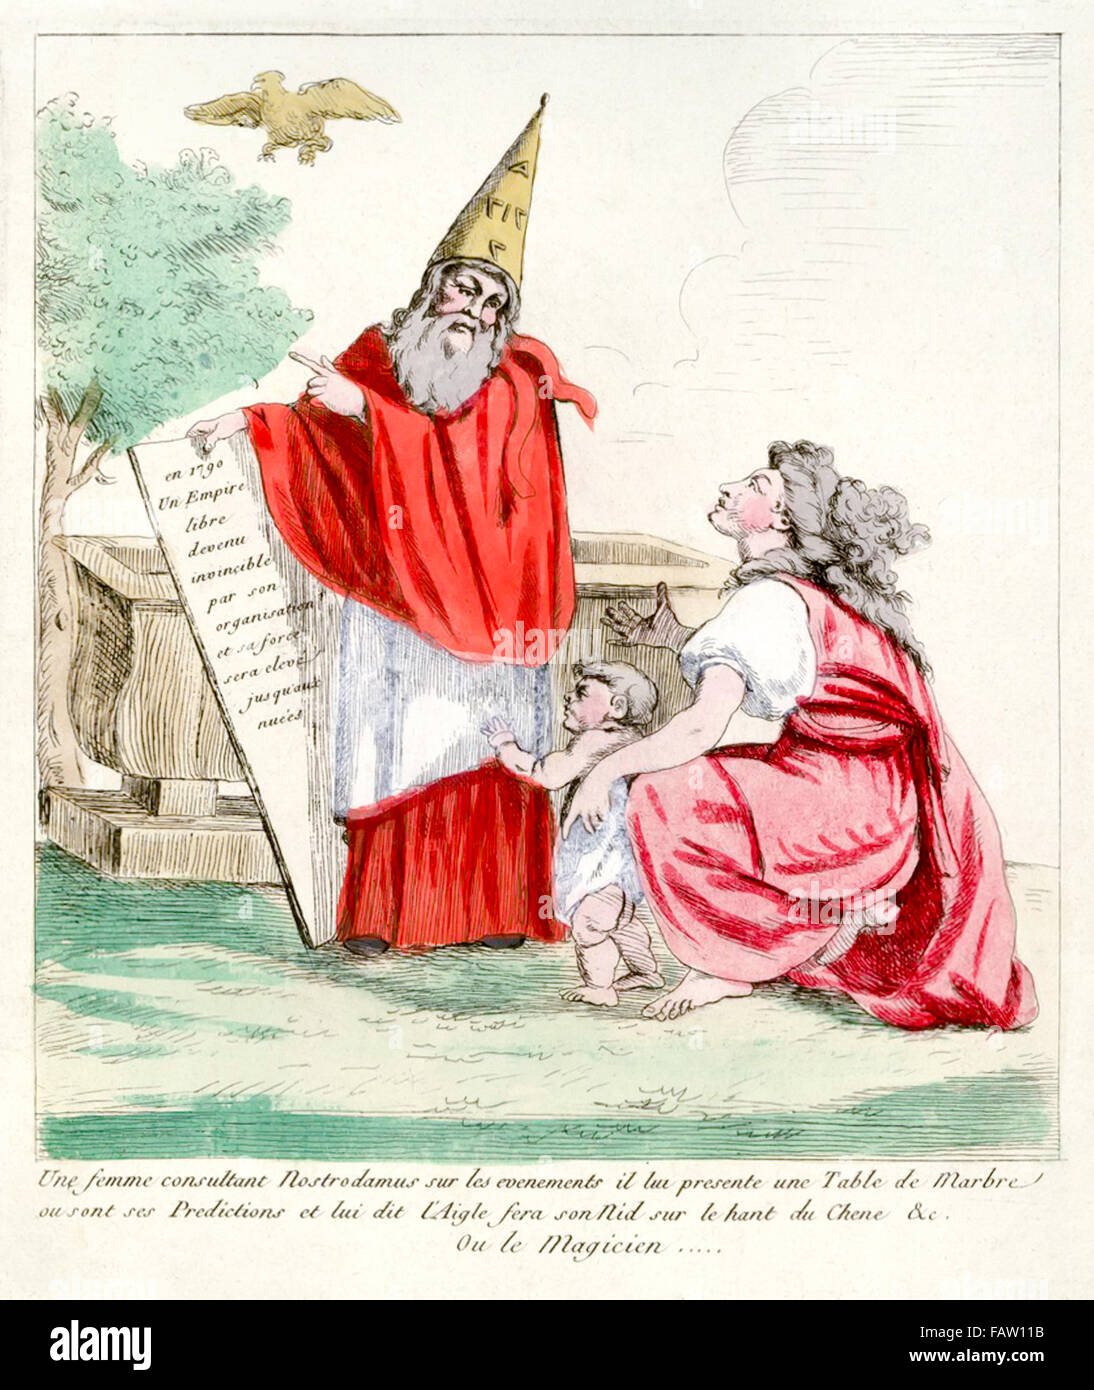 Political cartoon of 1790 showing Nostradamus (1503-1566) being consulted by woman with child; he holds a tablet containing his prediction of the French Revolution of 1790. The French Imperial Eagle can be seen in the sky behind. Stock Photo